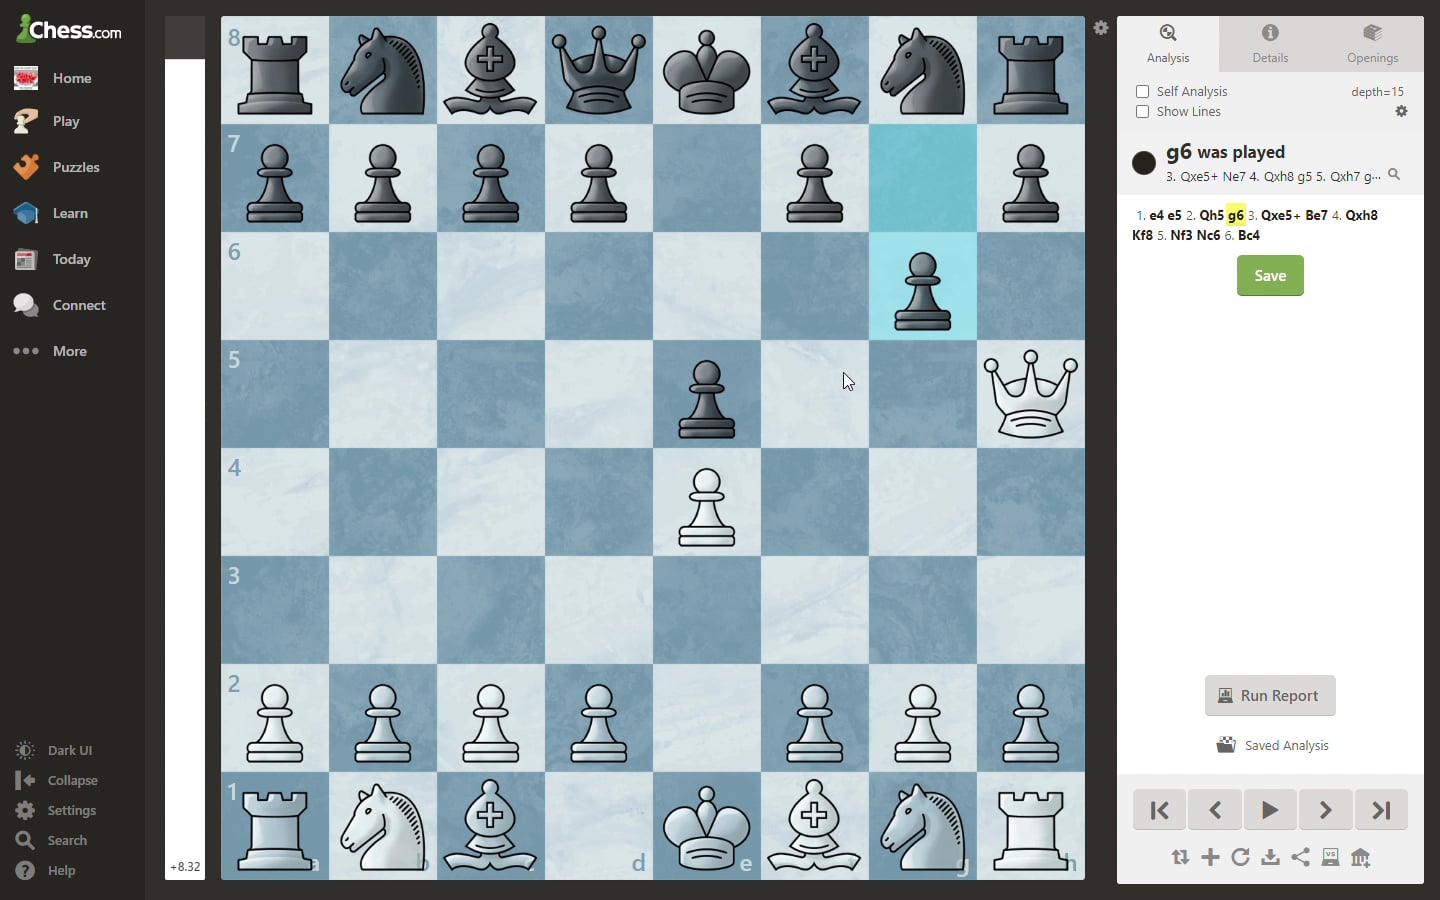 Chess Analysis Board and PGN Editor - Chess.com - Google Chrome 2021-04-10  11-36-08.mp4 on Vimeo